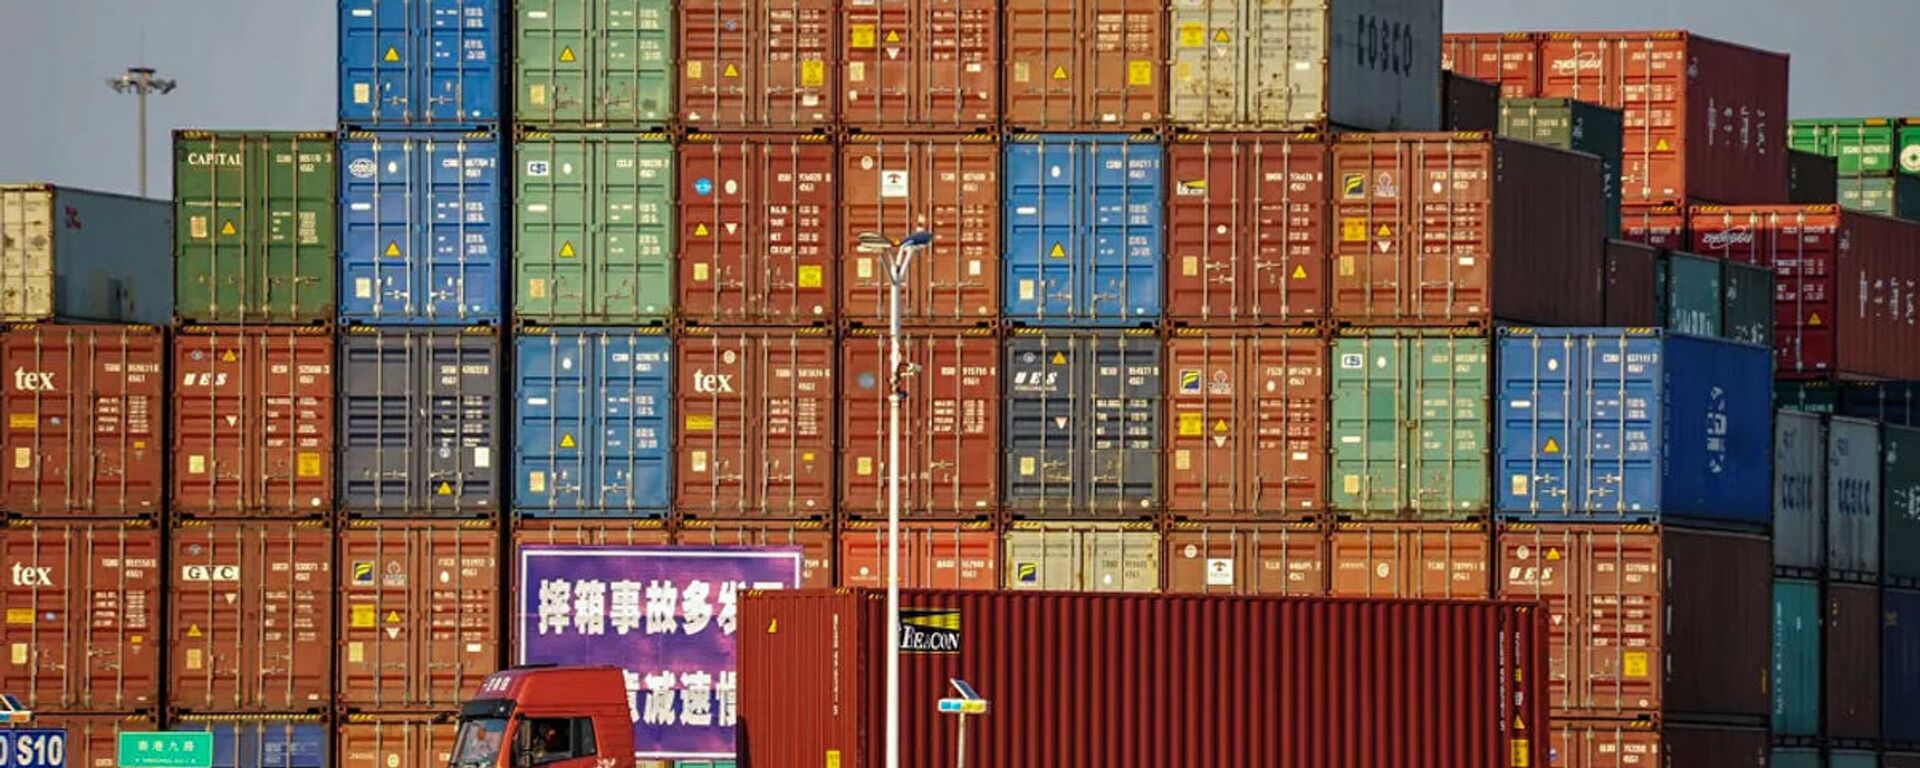 A truck transports a container next to stacked containers at a port in Qingdao in China's eastern Shandong province on October 12, 2018 - 俄羅斯衛星通訊社, 1920, 30.03.2021